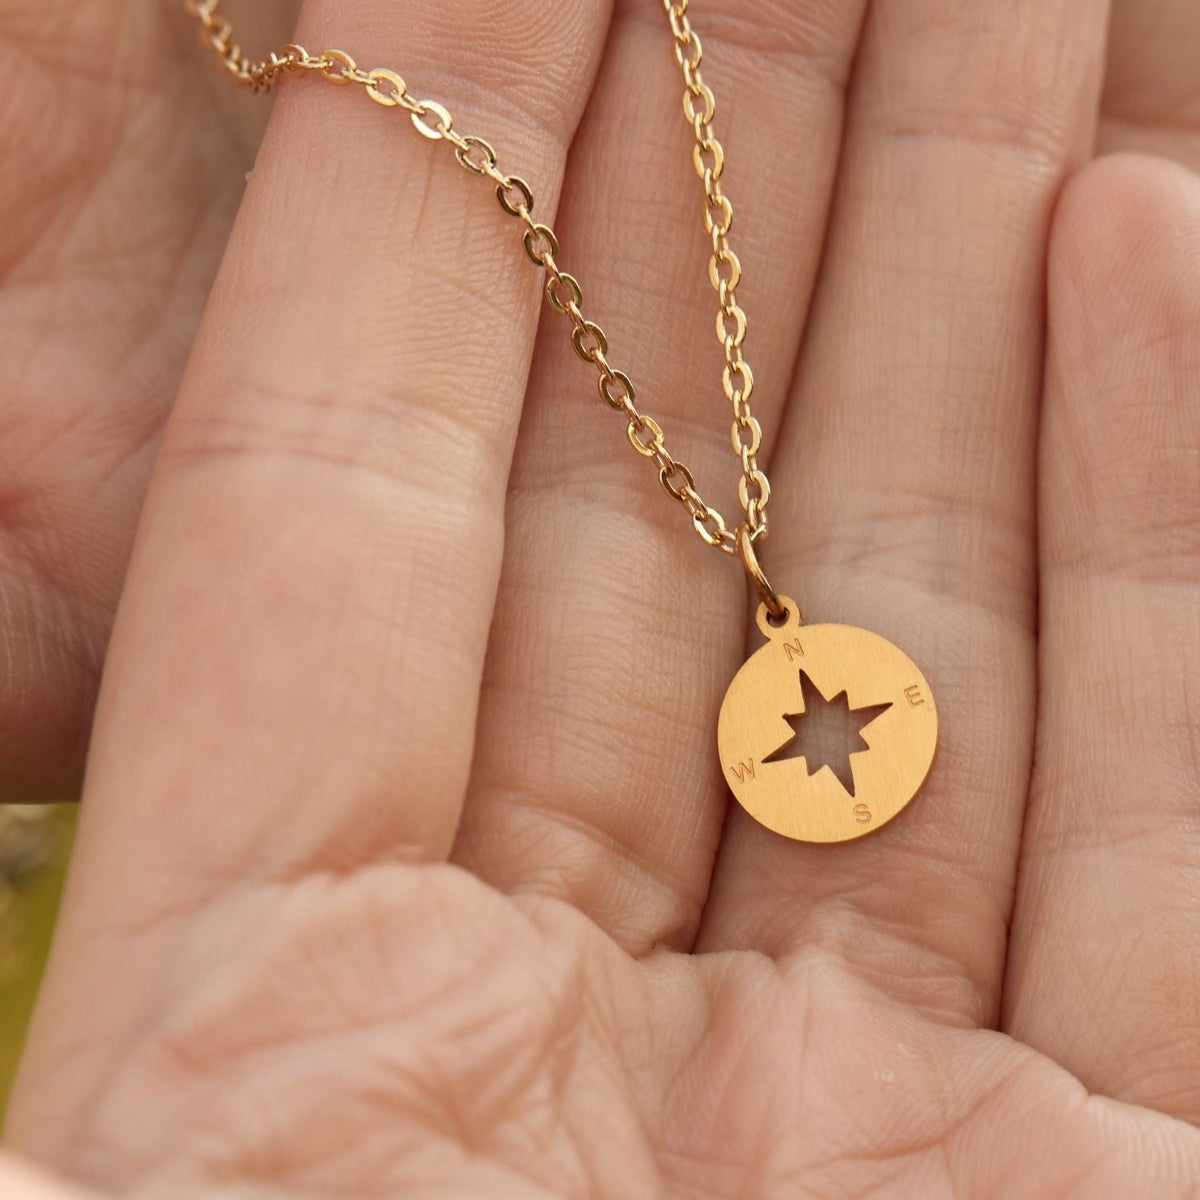 To My Boyfriend&#39;s Beautiful Mom | Until I Met Your Son | Compass Necklace